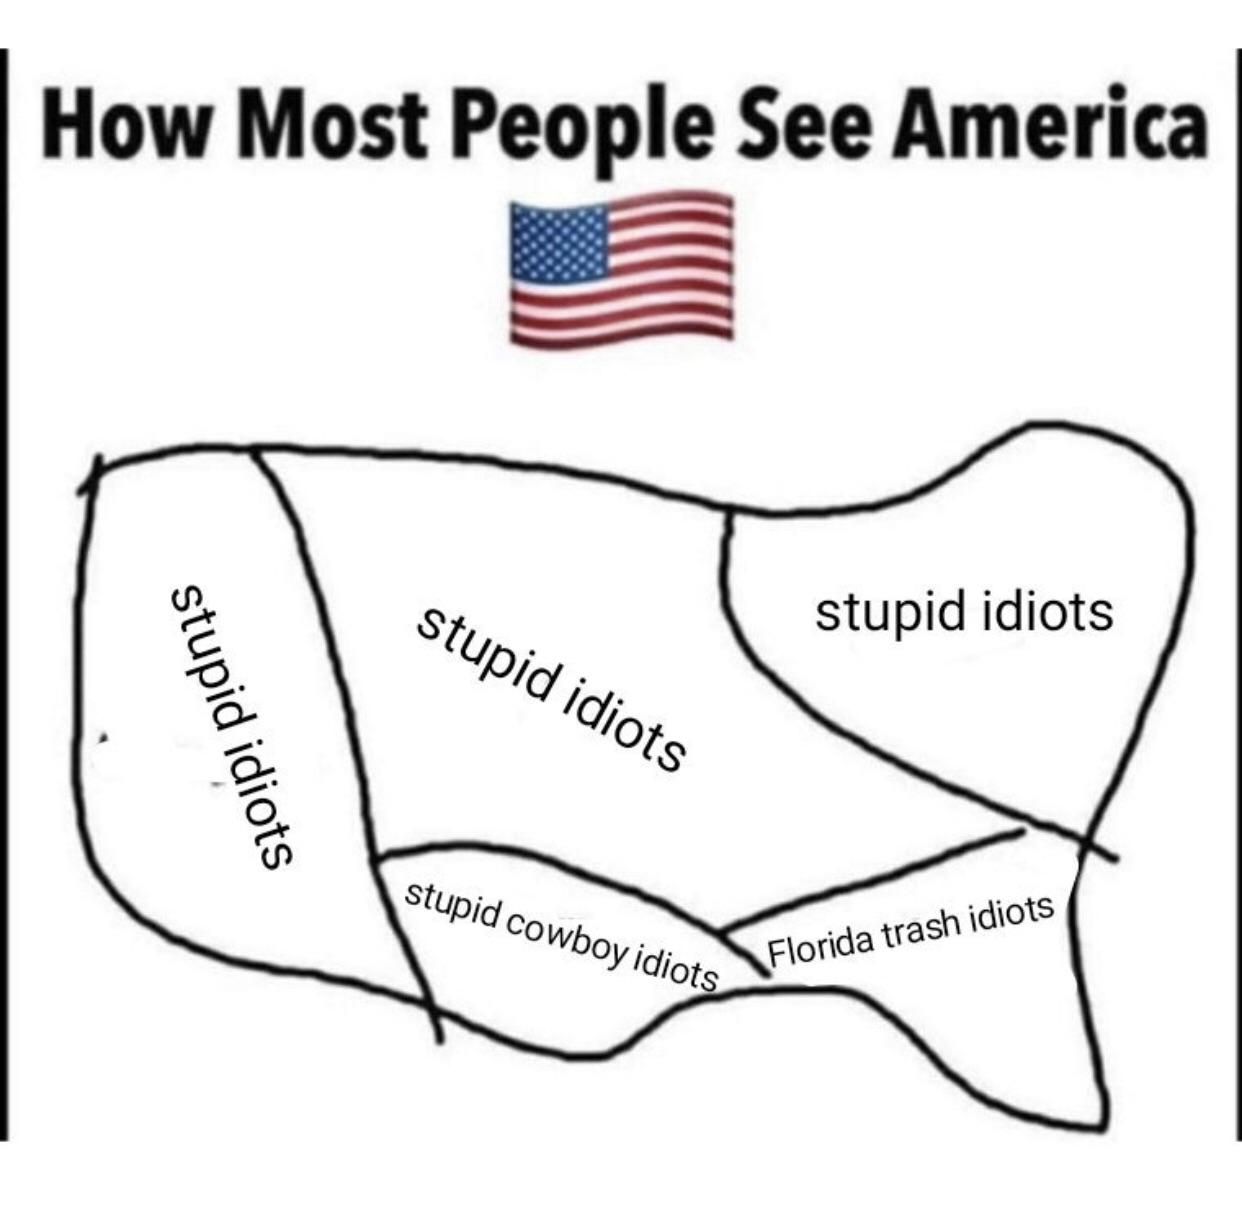 Americans do too